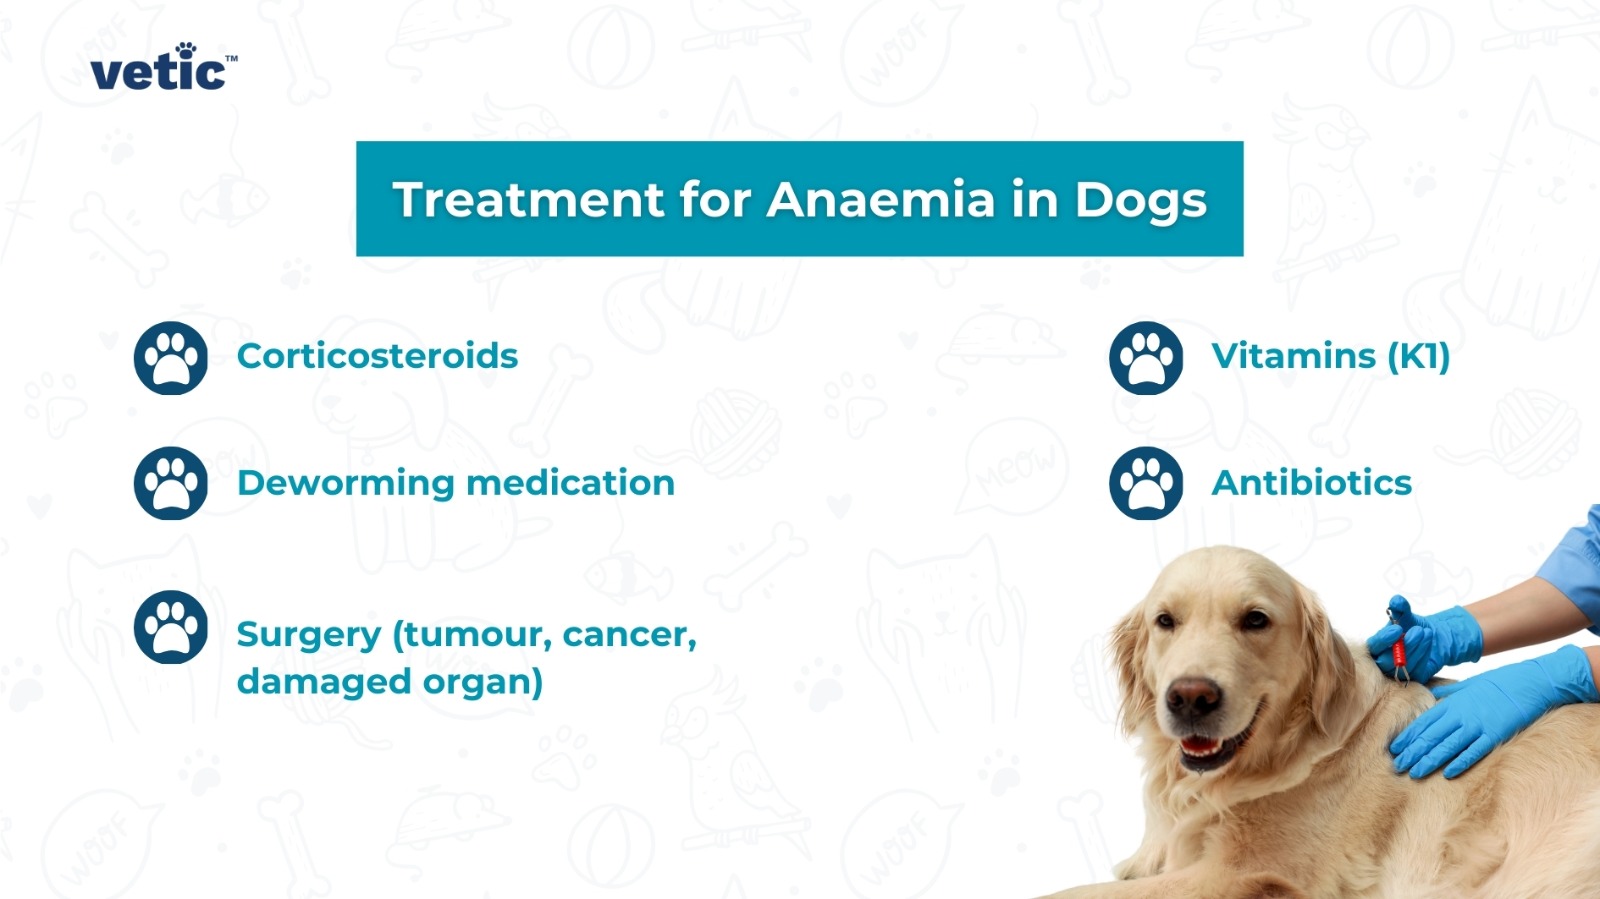 The image contains the logo of “vetic” at the top left corner. It lists treatments for canine anaemia, including corticosteroids, deworming medication, surgery (for tumour, cancer, damaged organ), vitamins (K1), and antibiotics. There is also an image of a dog being examined by a person wearing gloves.